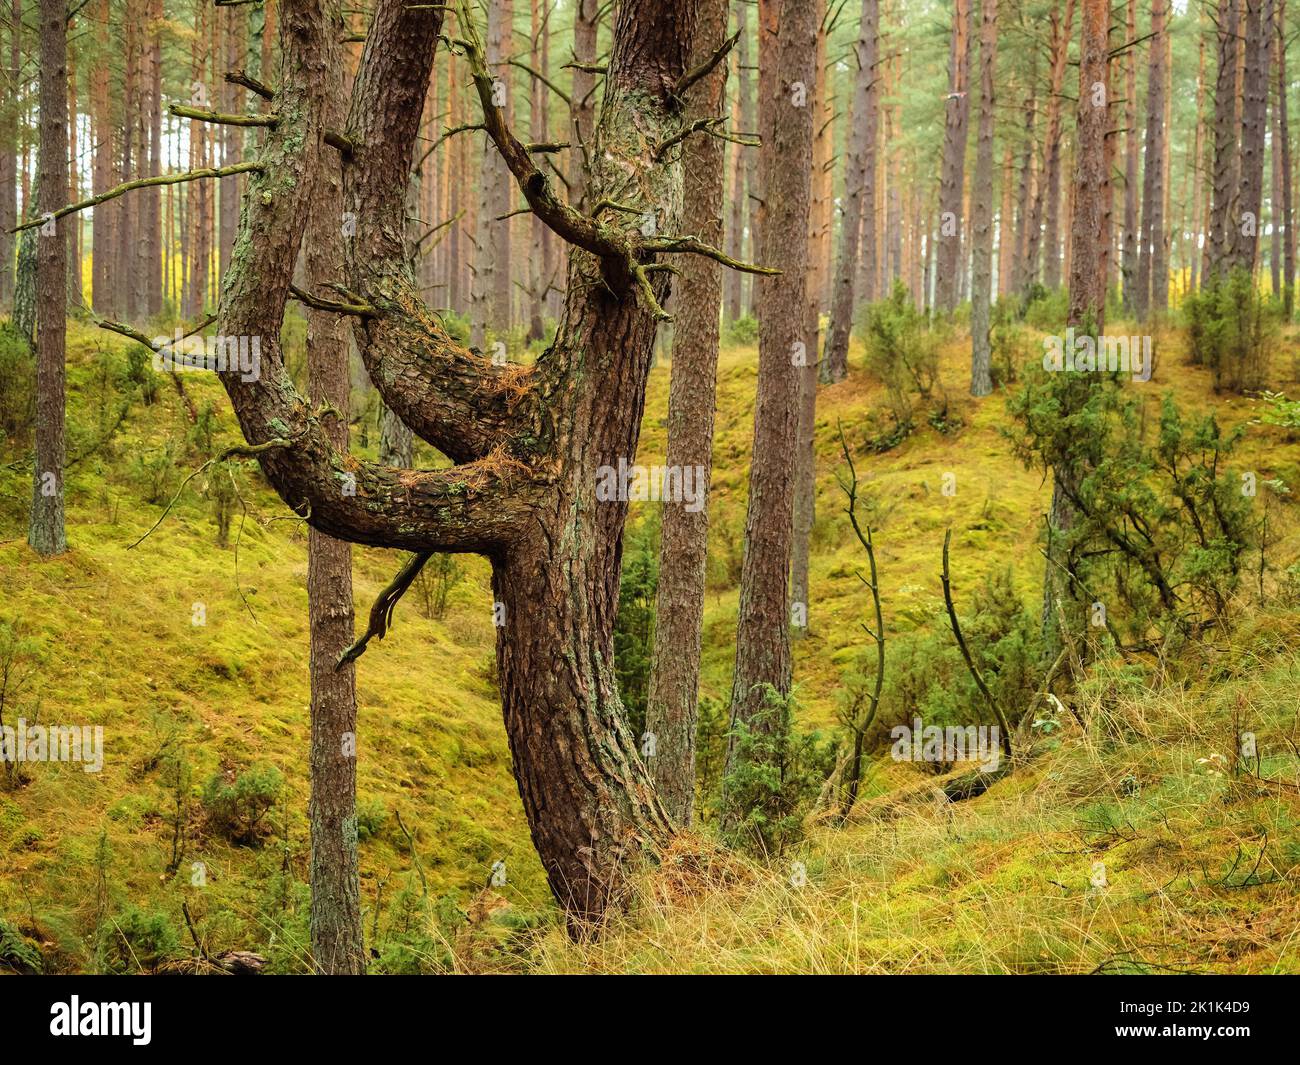 tree trunk in a deep moody forest in autumn season in a rainy day. wild nature background Stock Photo